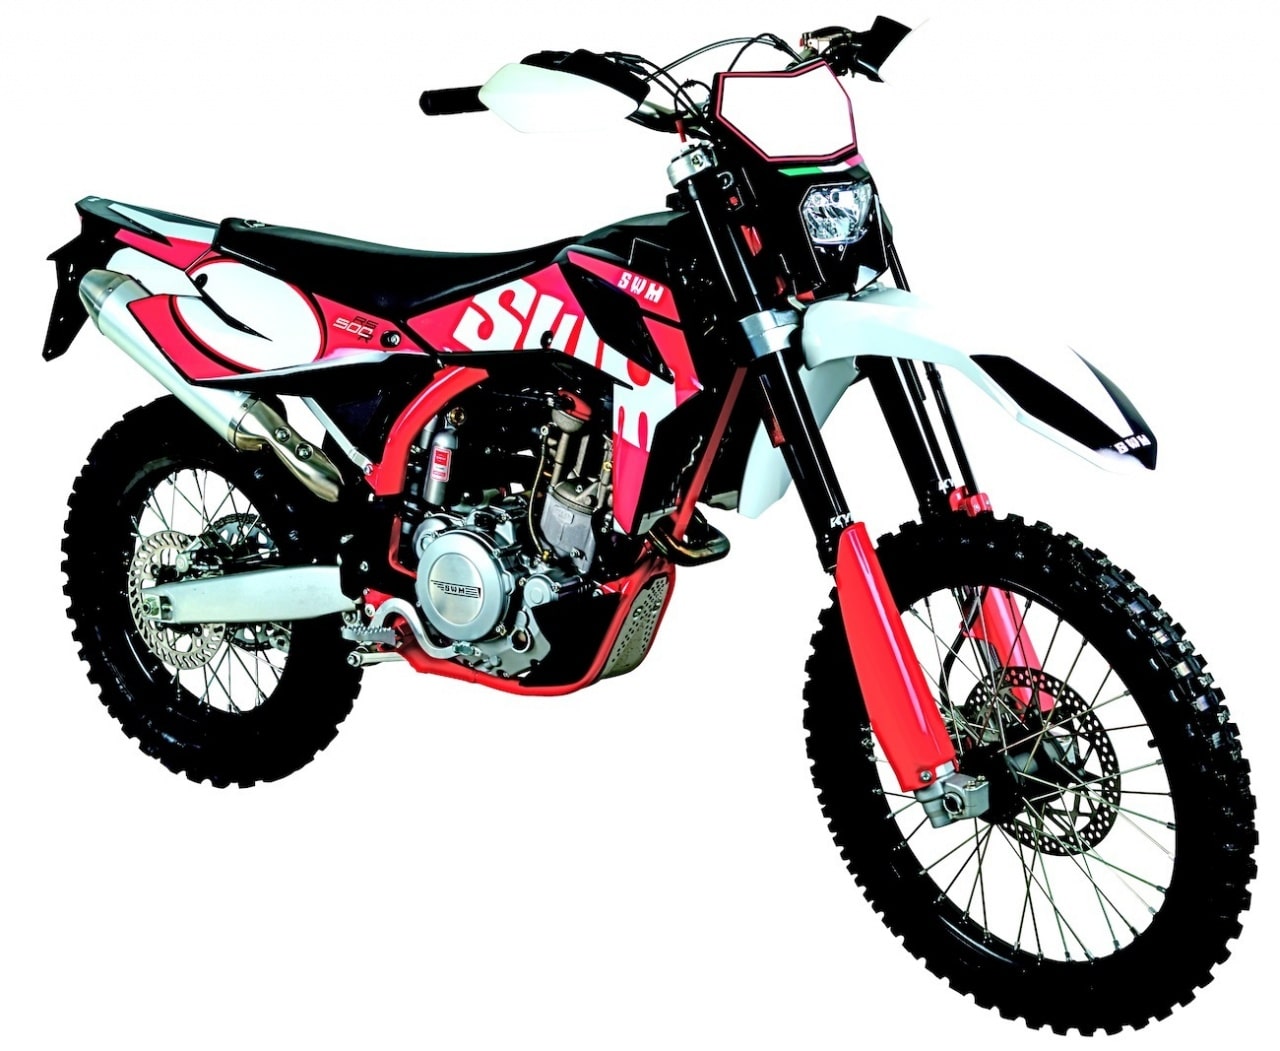 SWM MOTORCYCLES ARE ABOUT TO BREAK COVER IN THE USA - Motocross Action